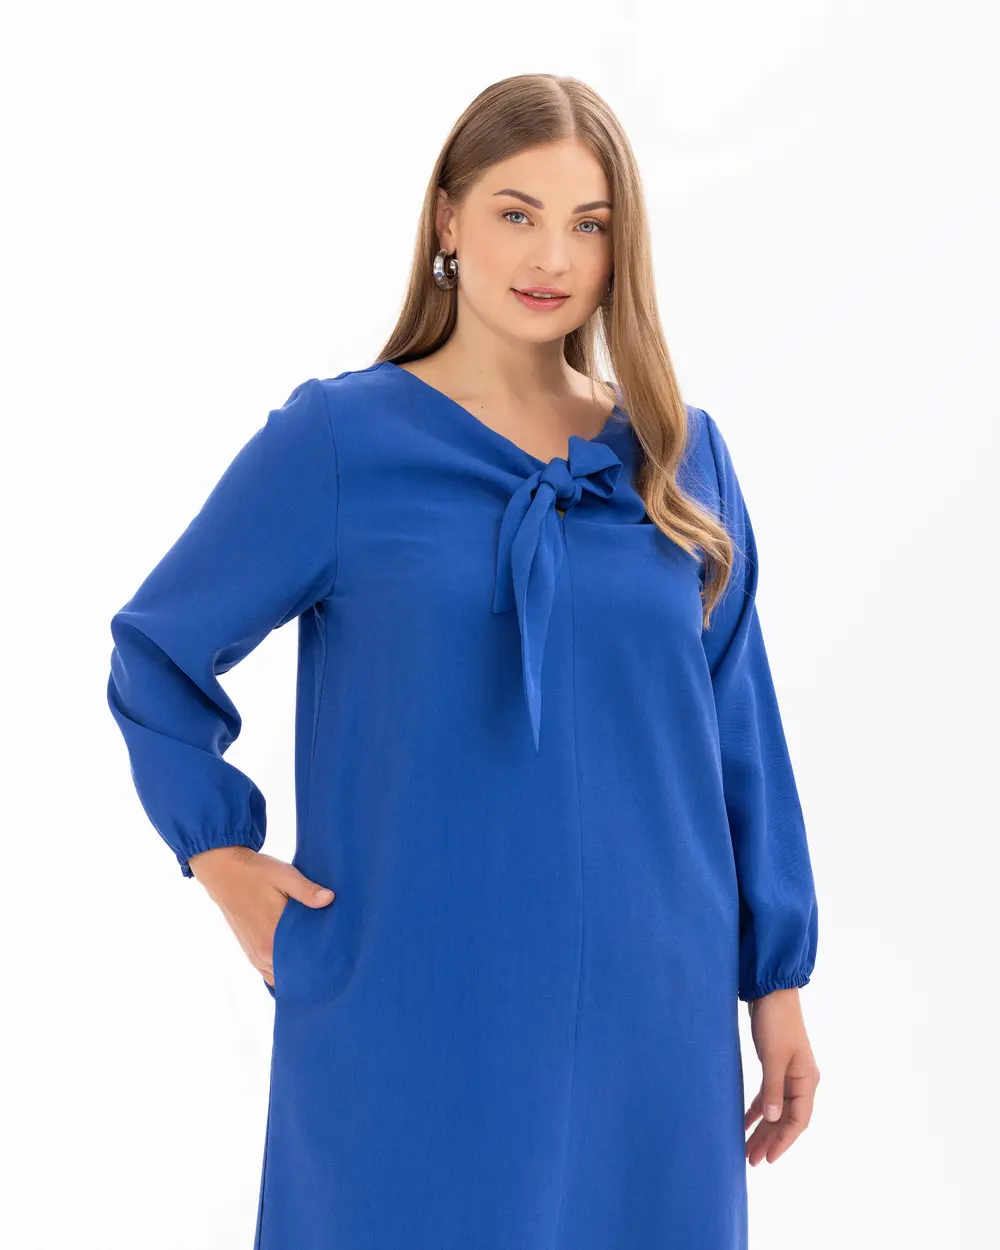 Plus Size Collared Dress